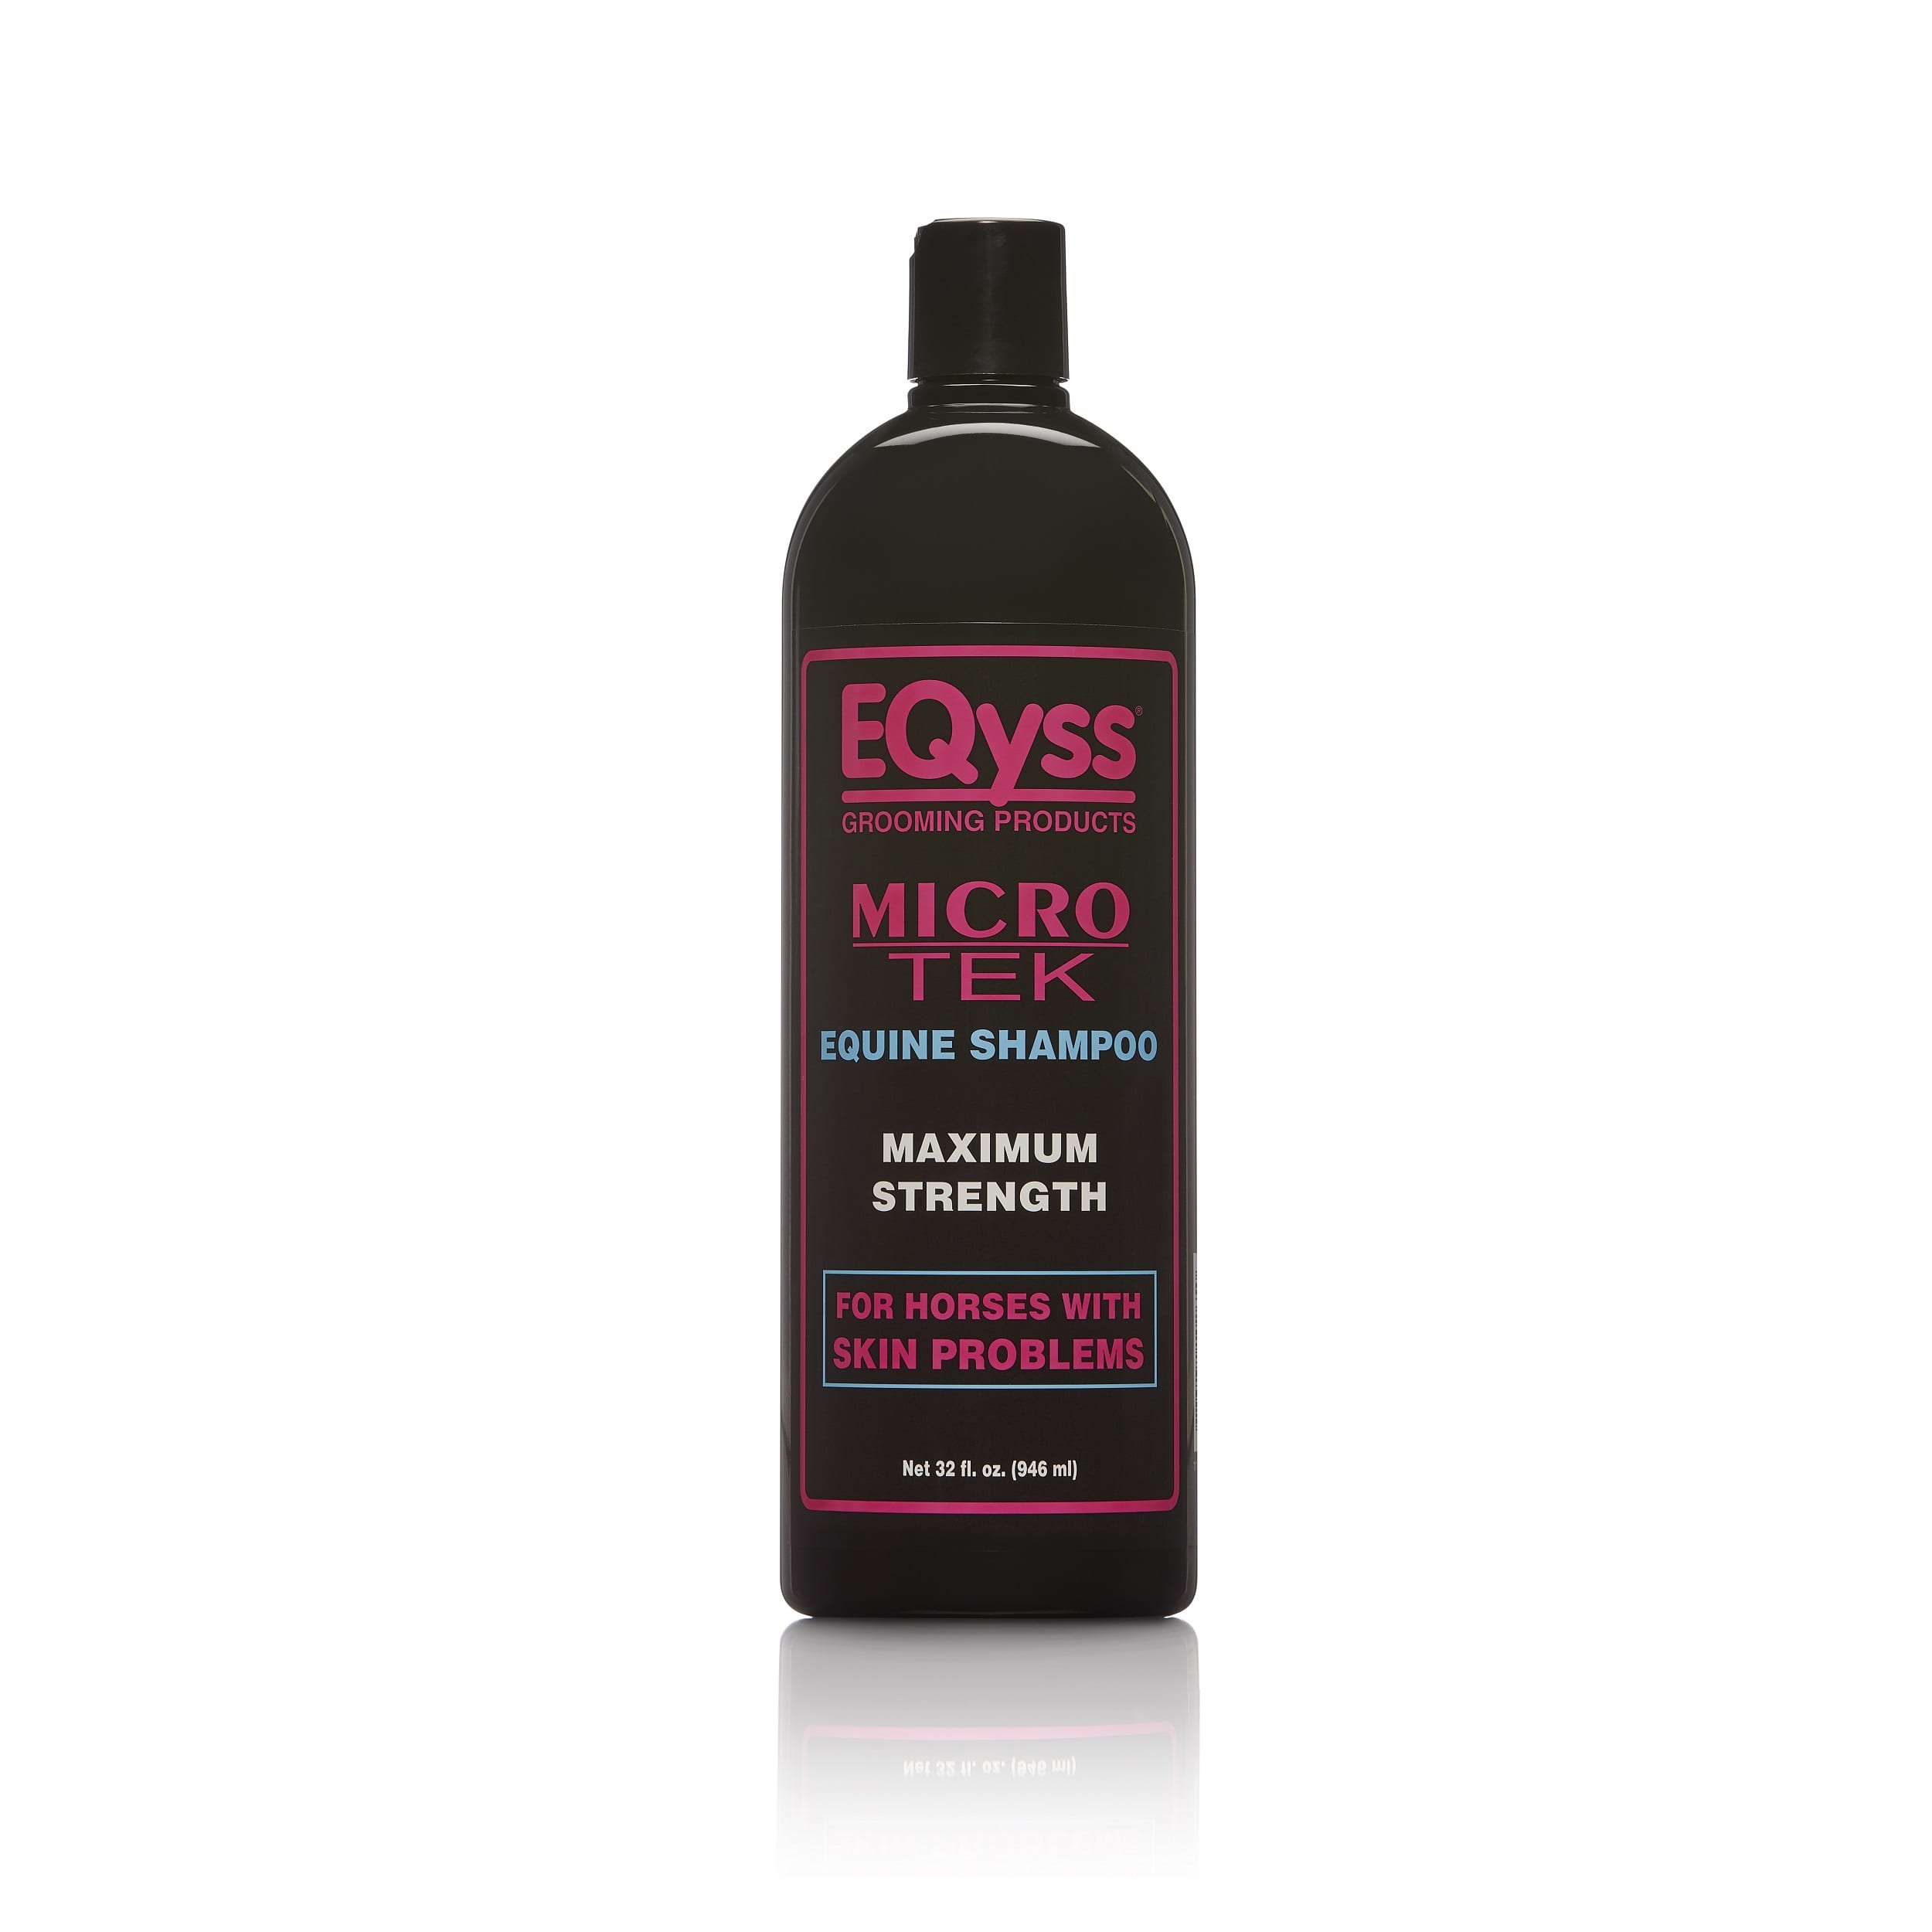 Micro-Tek Equine Shampoo - Soothes irritated skin CONTACT! EQyss Grooming Products